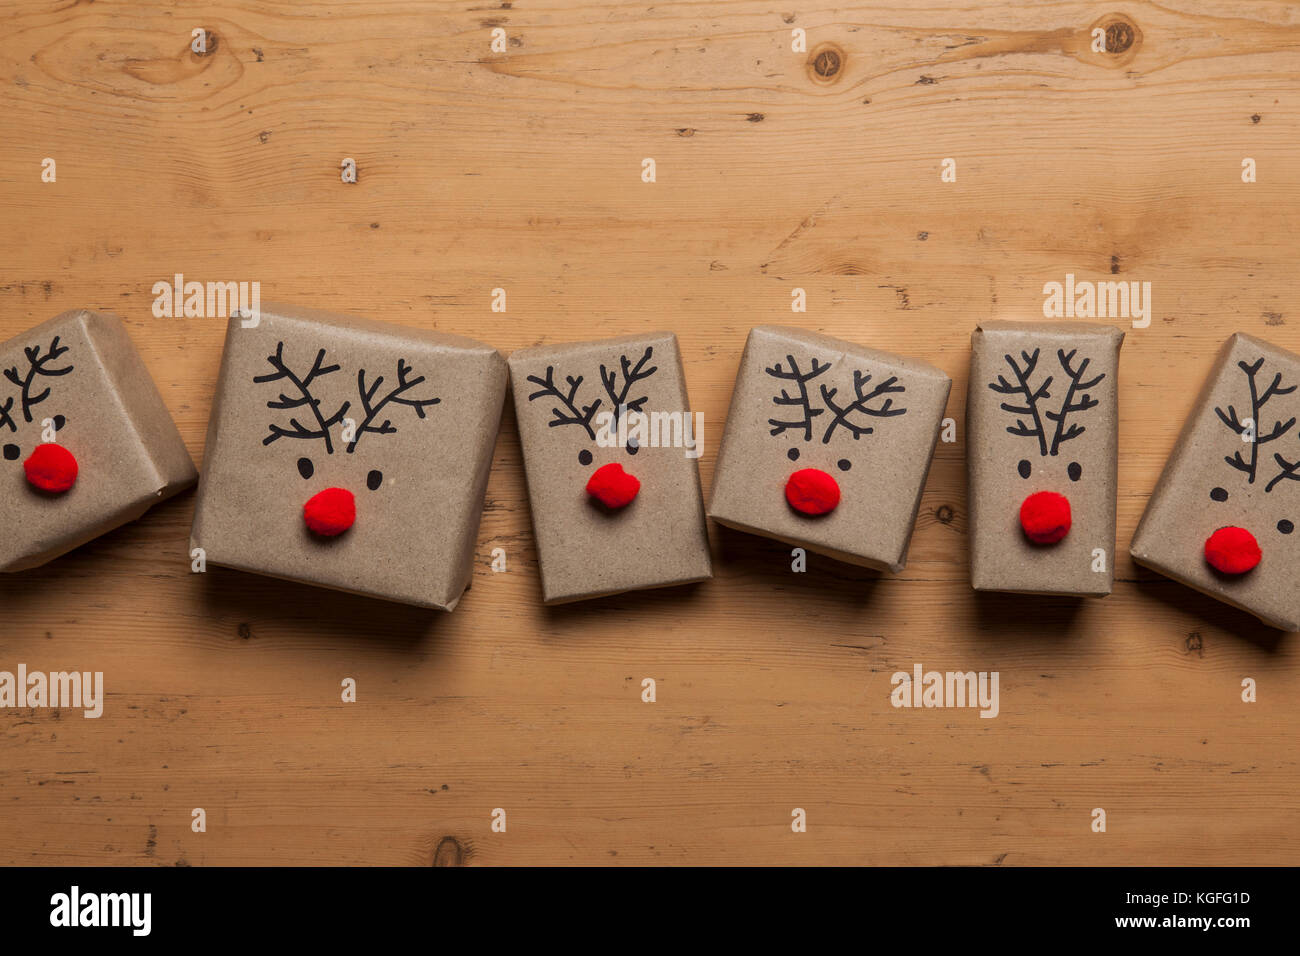 Christmas gift boxes with reindeer faces Stock Photo